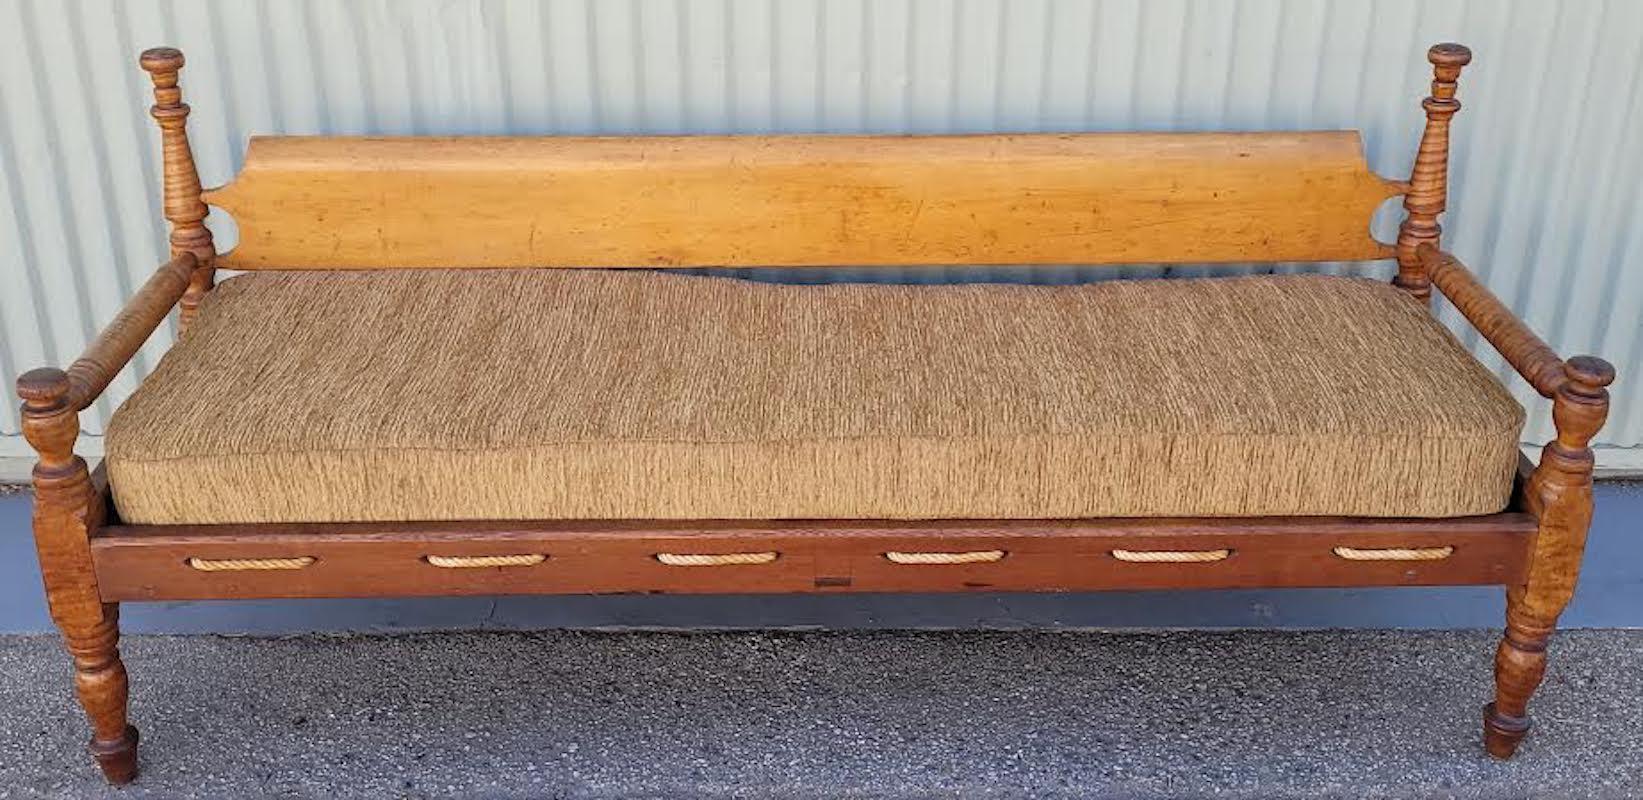 Beautiful 19th C Birdseye Maple Daybed/Settee. Pristine condition. Upholstered in A beautiful gold textered velvet. This piece would be nice at the end of a bed. It can also be a nice Bench, Daybed or Settee 

Measures: 31 H
28.5 D 
72 L
Seat H